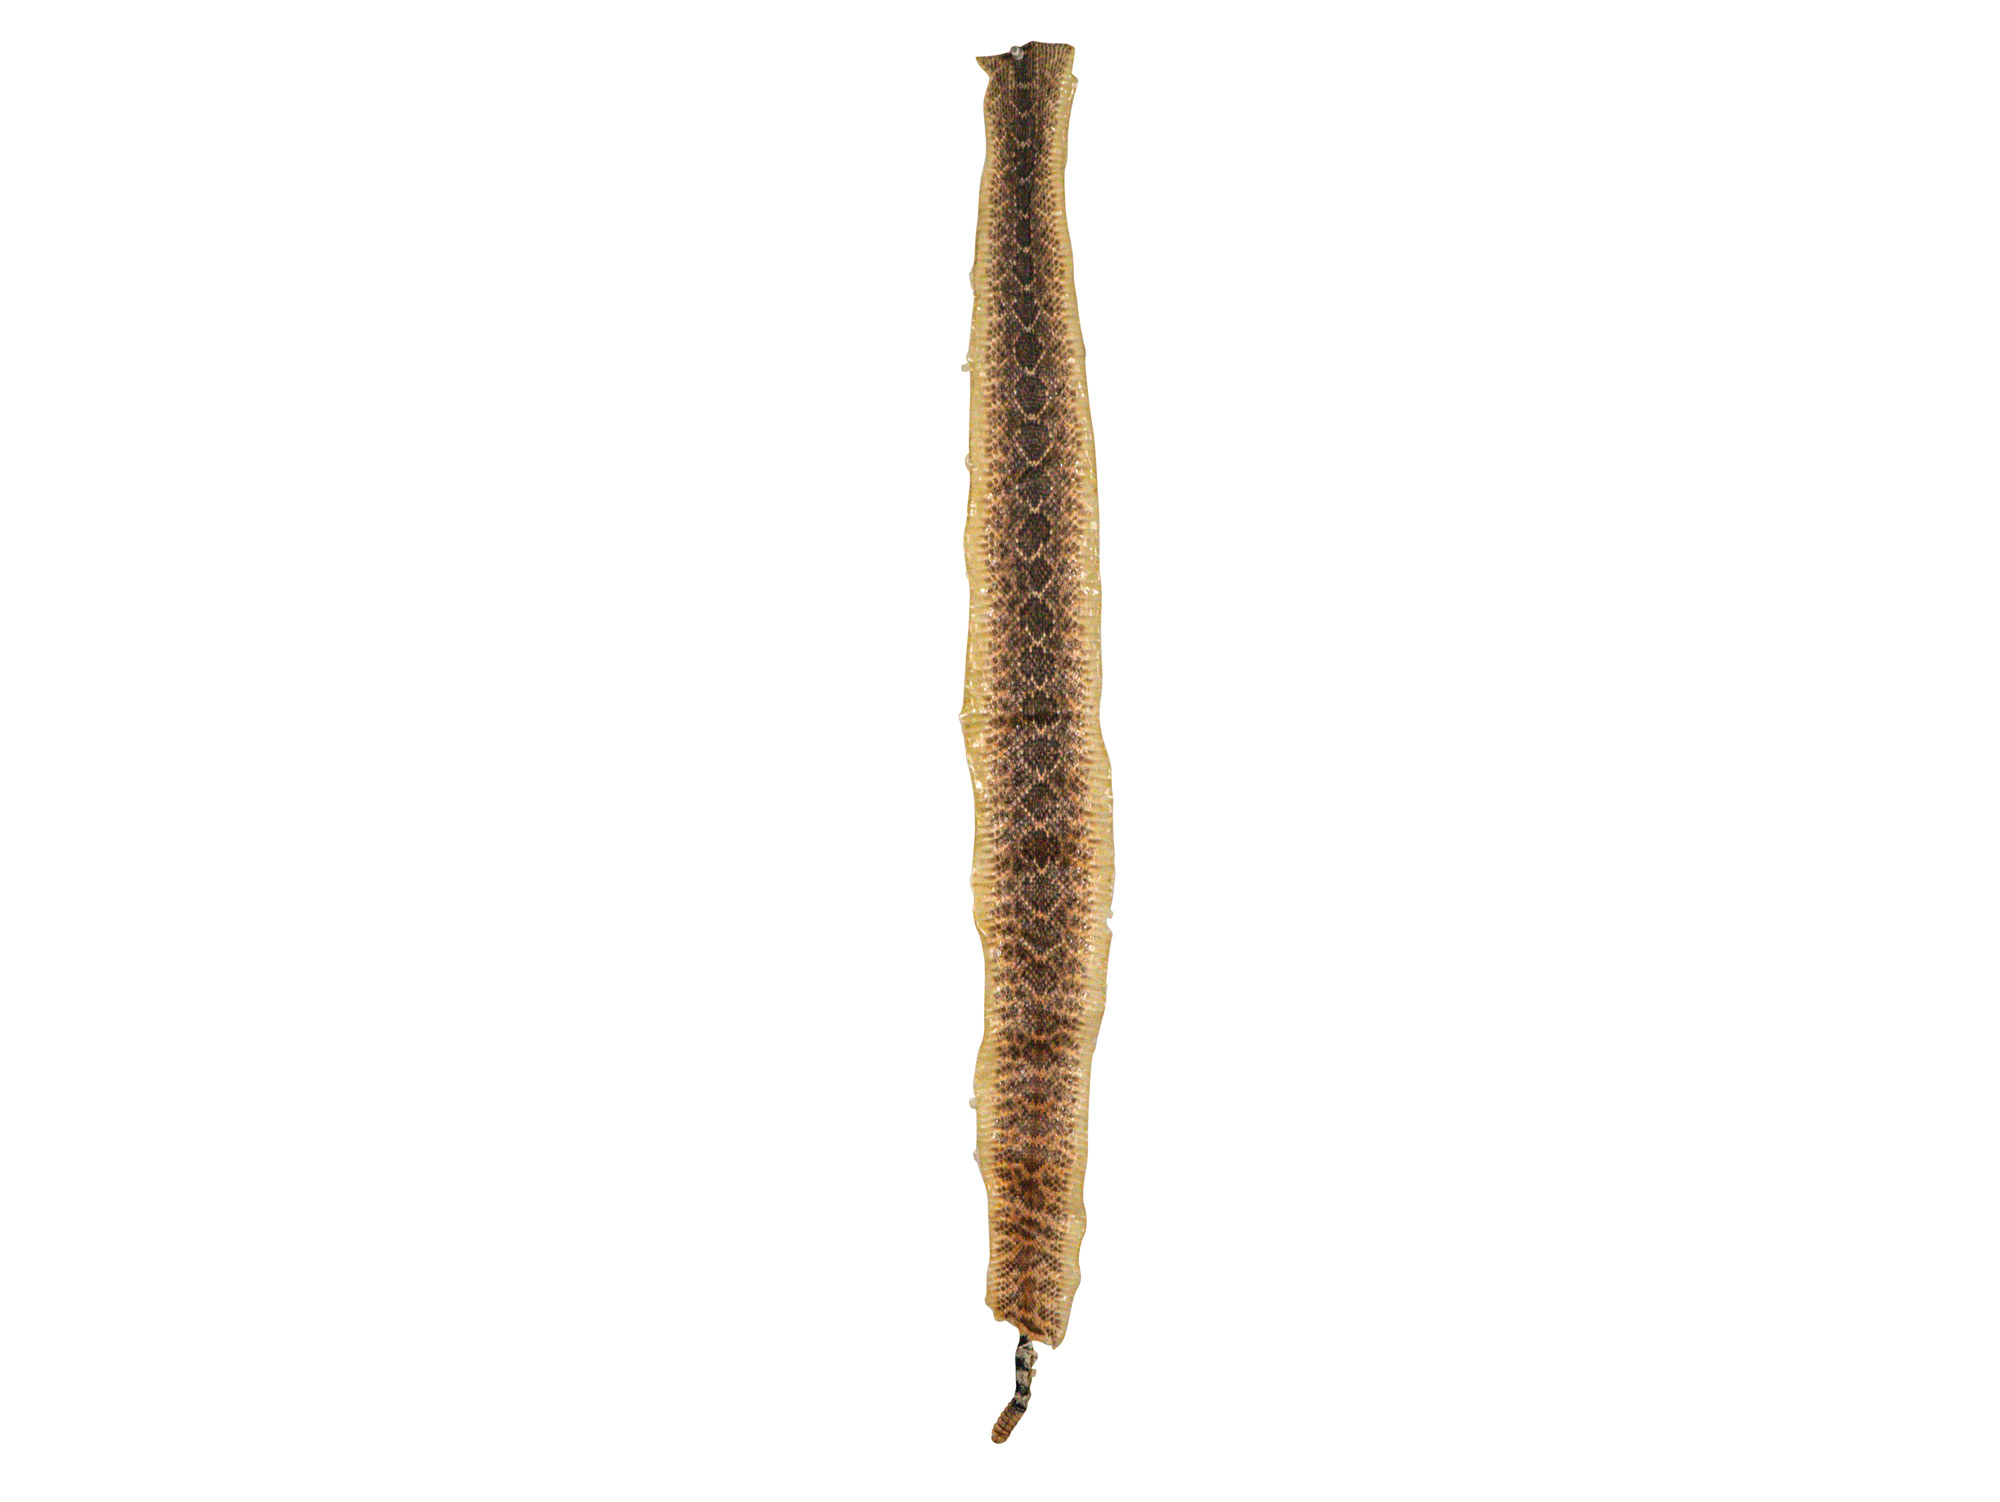 Rattlesnake Skin with Rattle: 38" to 43" including rattle 